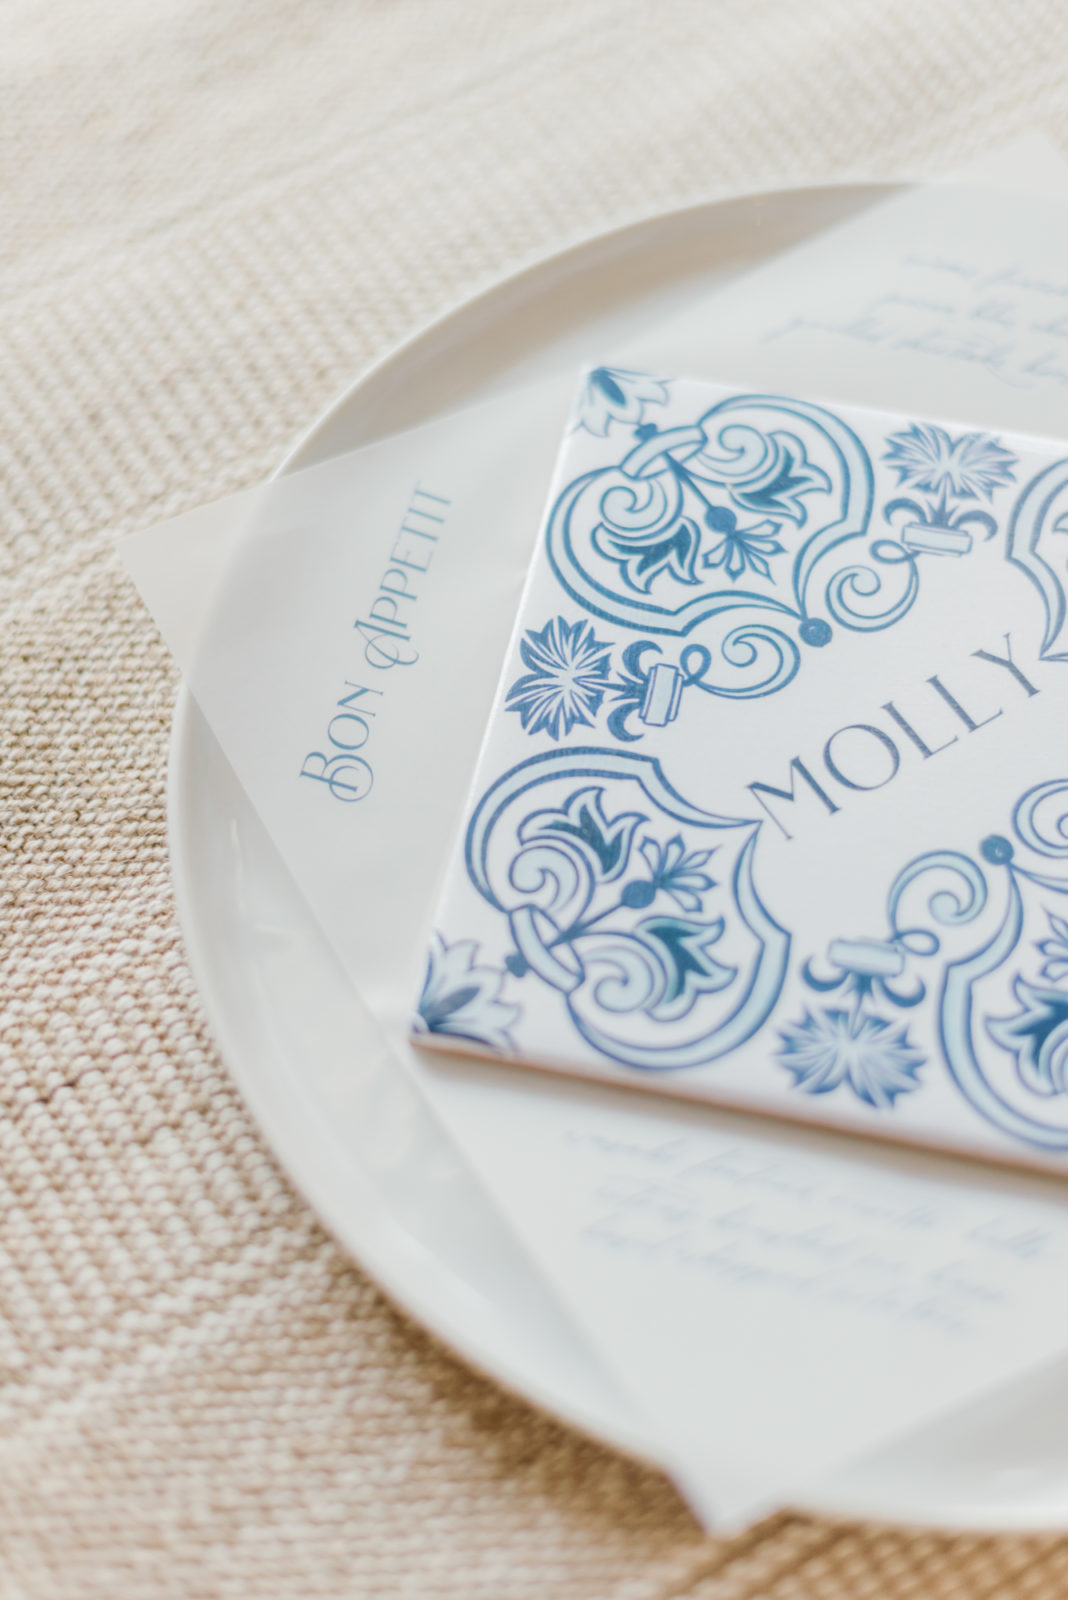 Portugal inspired tile wedding place cards